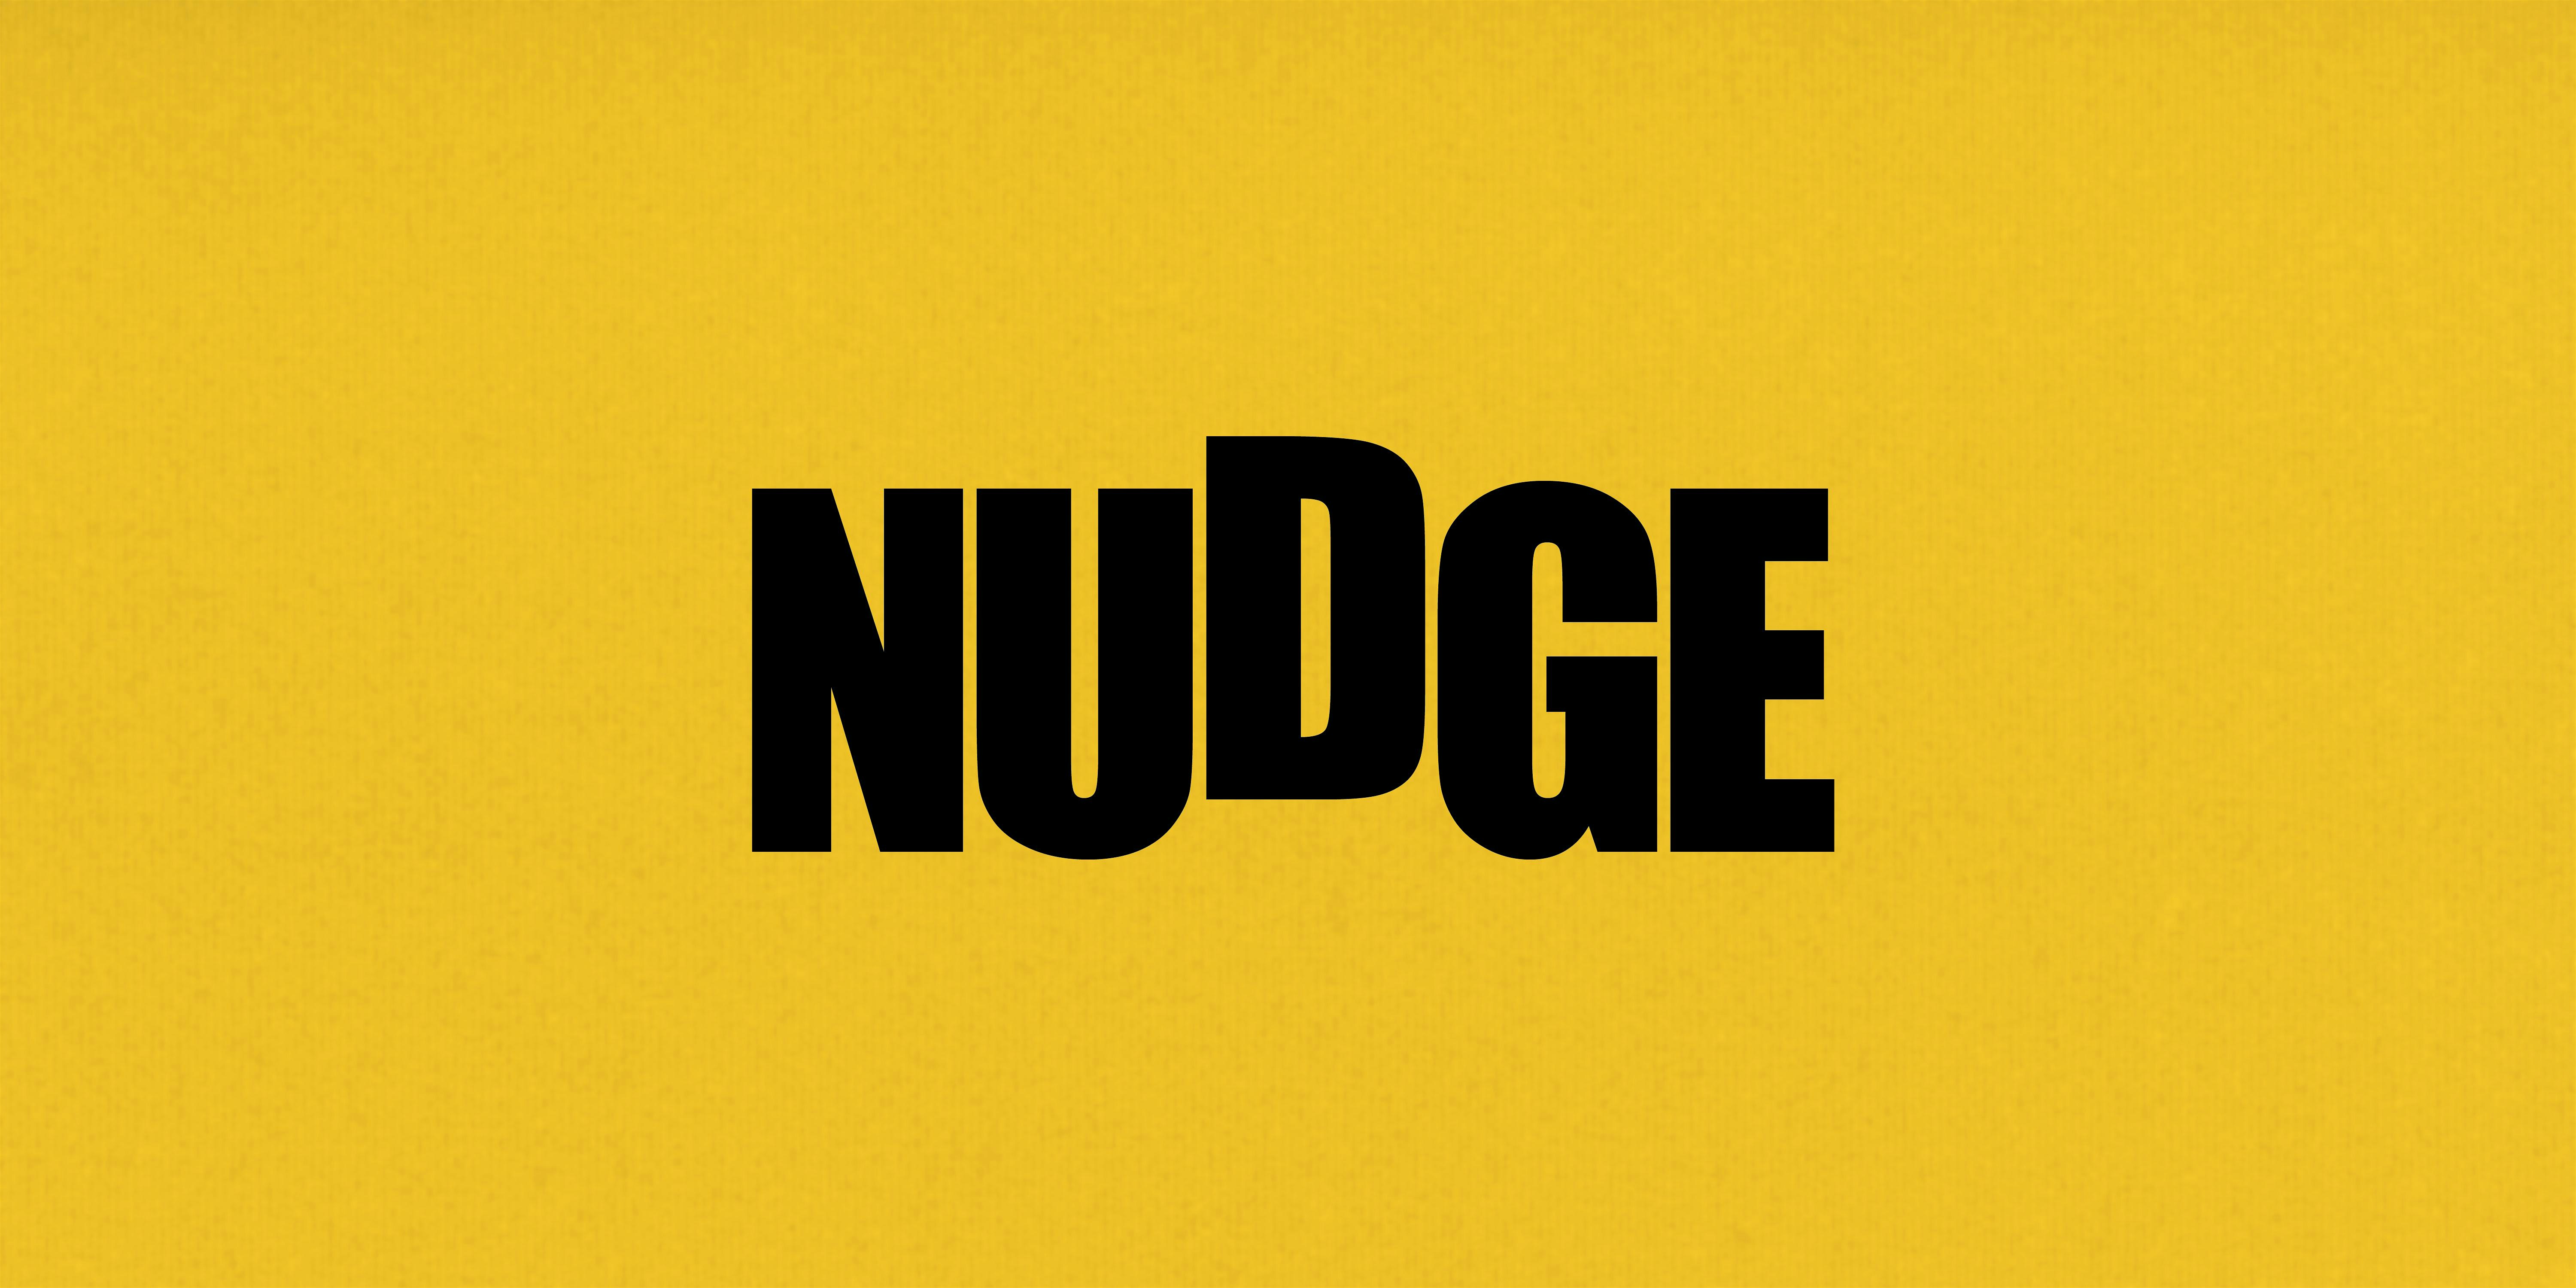 Nudge :A Multimedia Exhibition by Patrick Colhoun and Haller Clarke